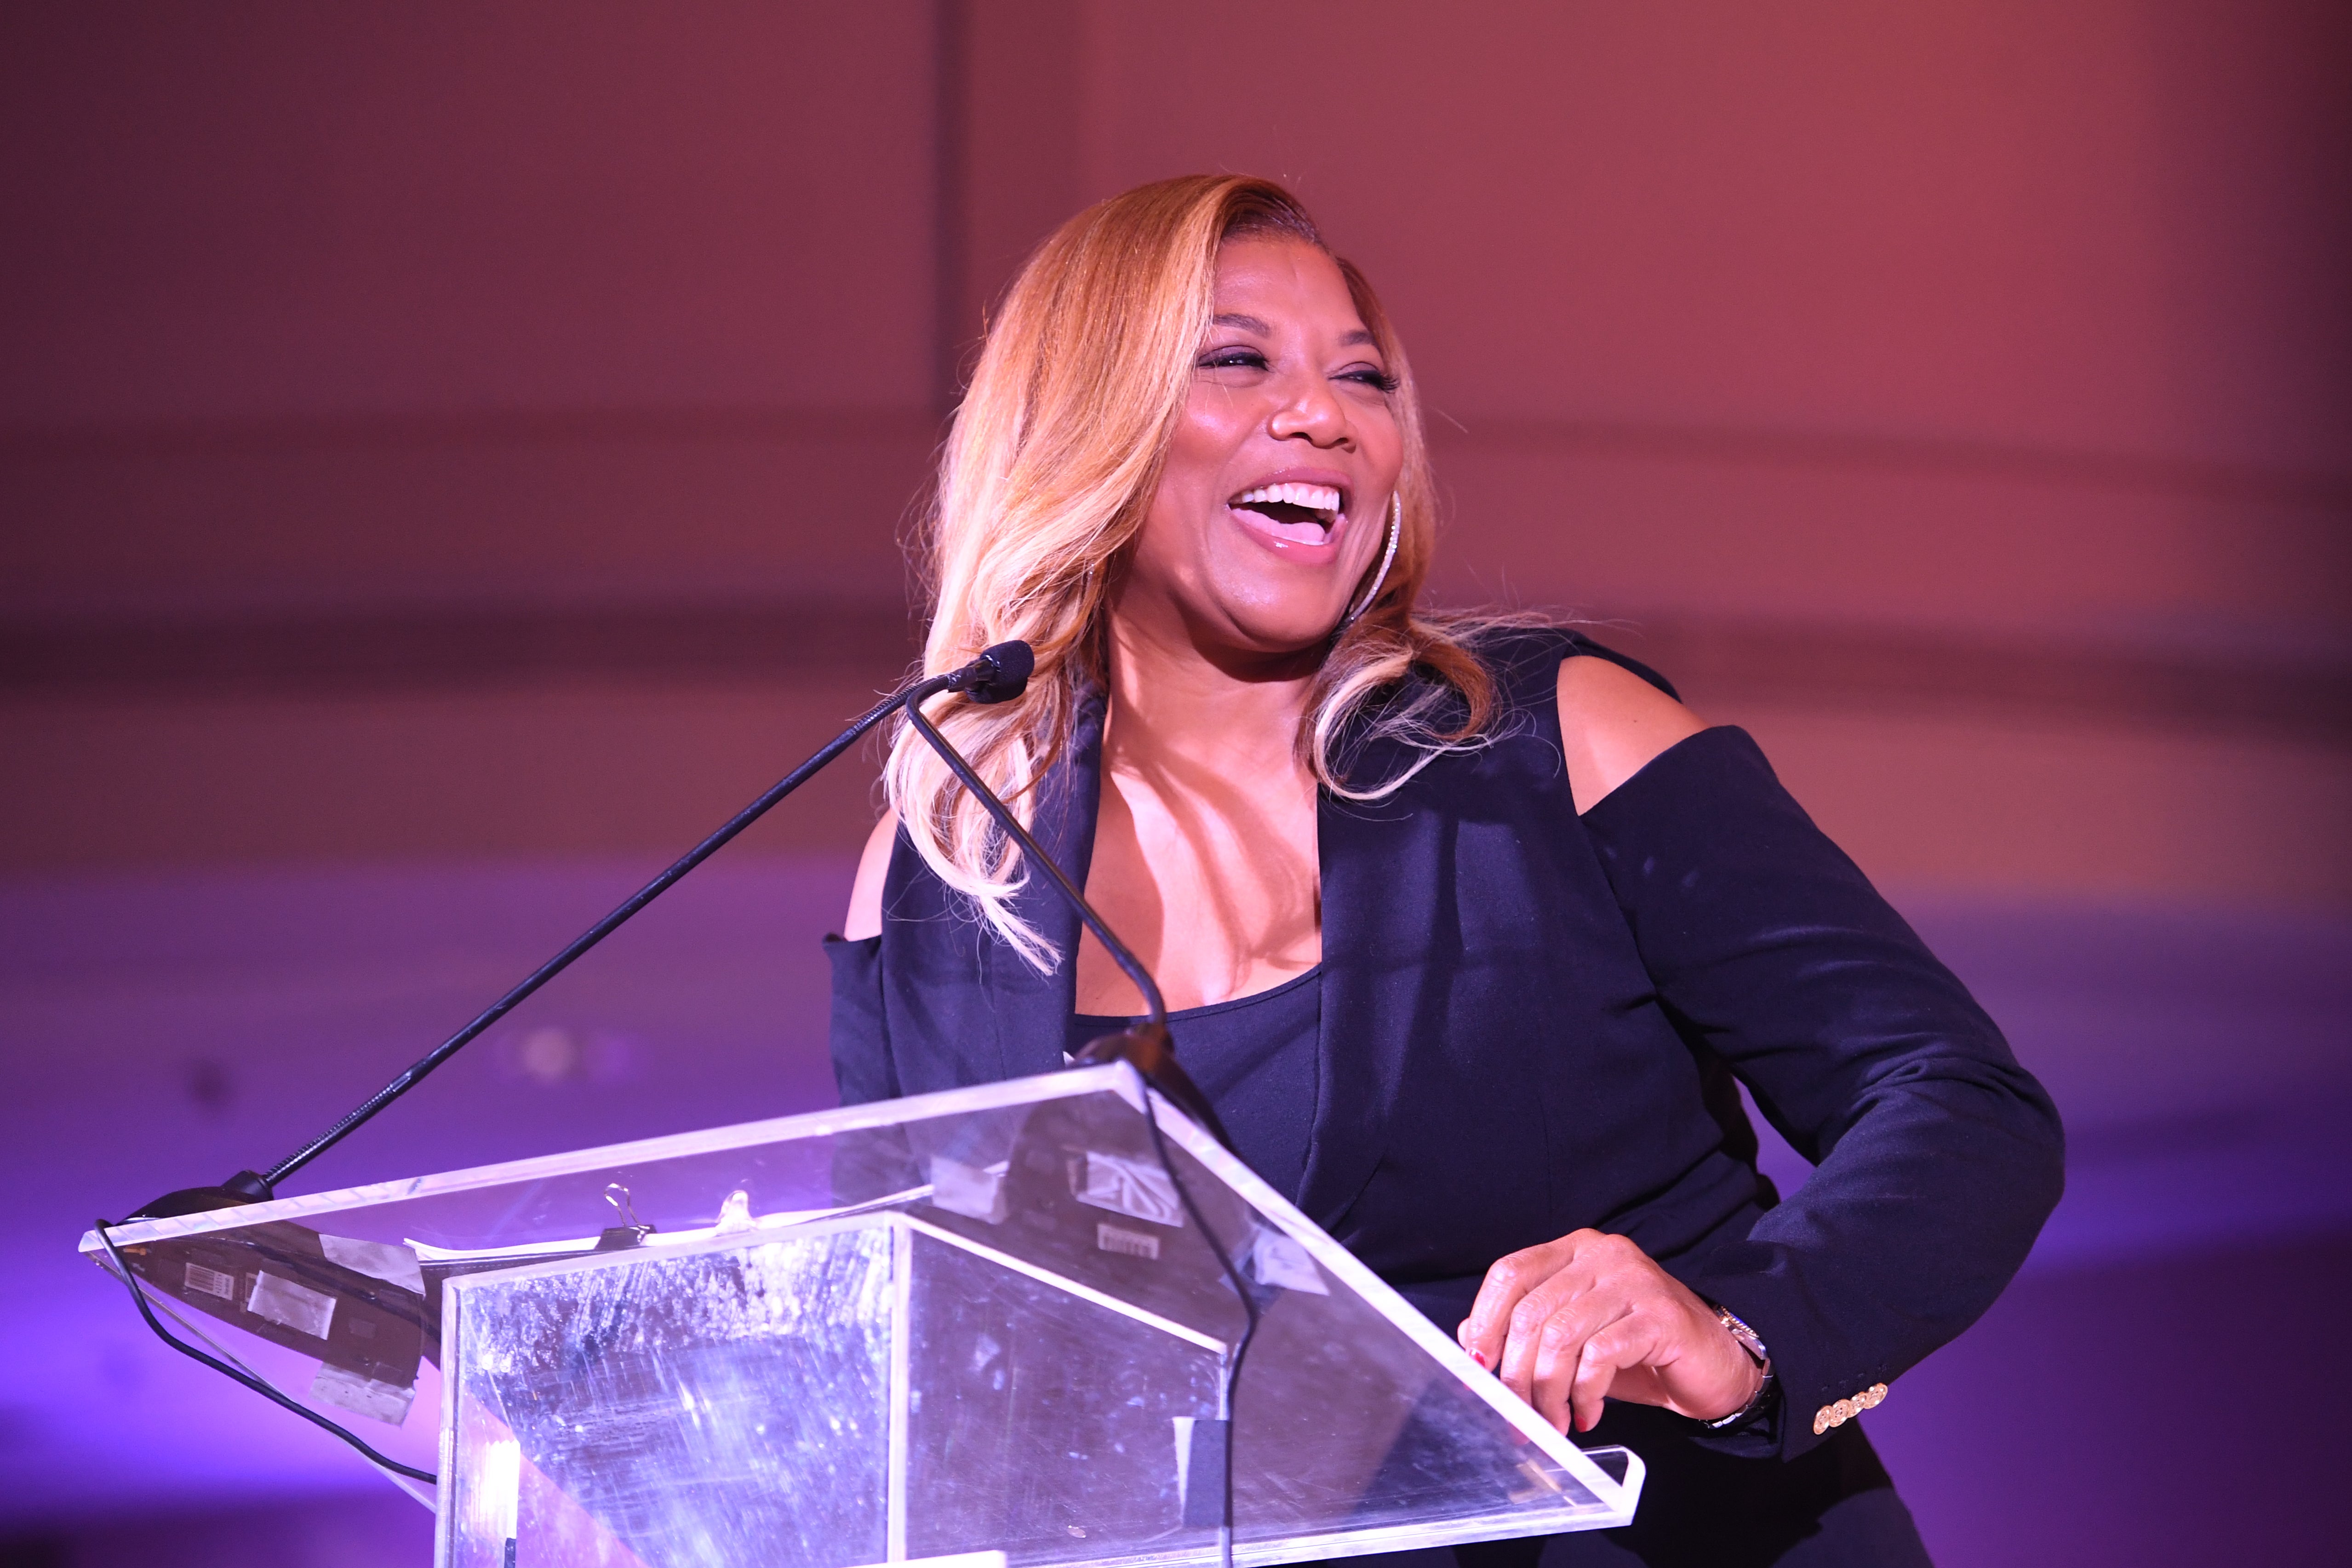 Queen Latifah, Gabrielle Union, Lala Anthony and More Celebs Out and About
